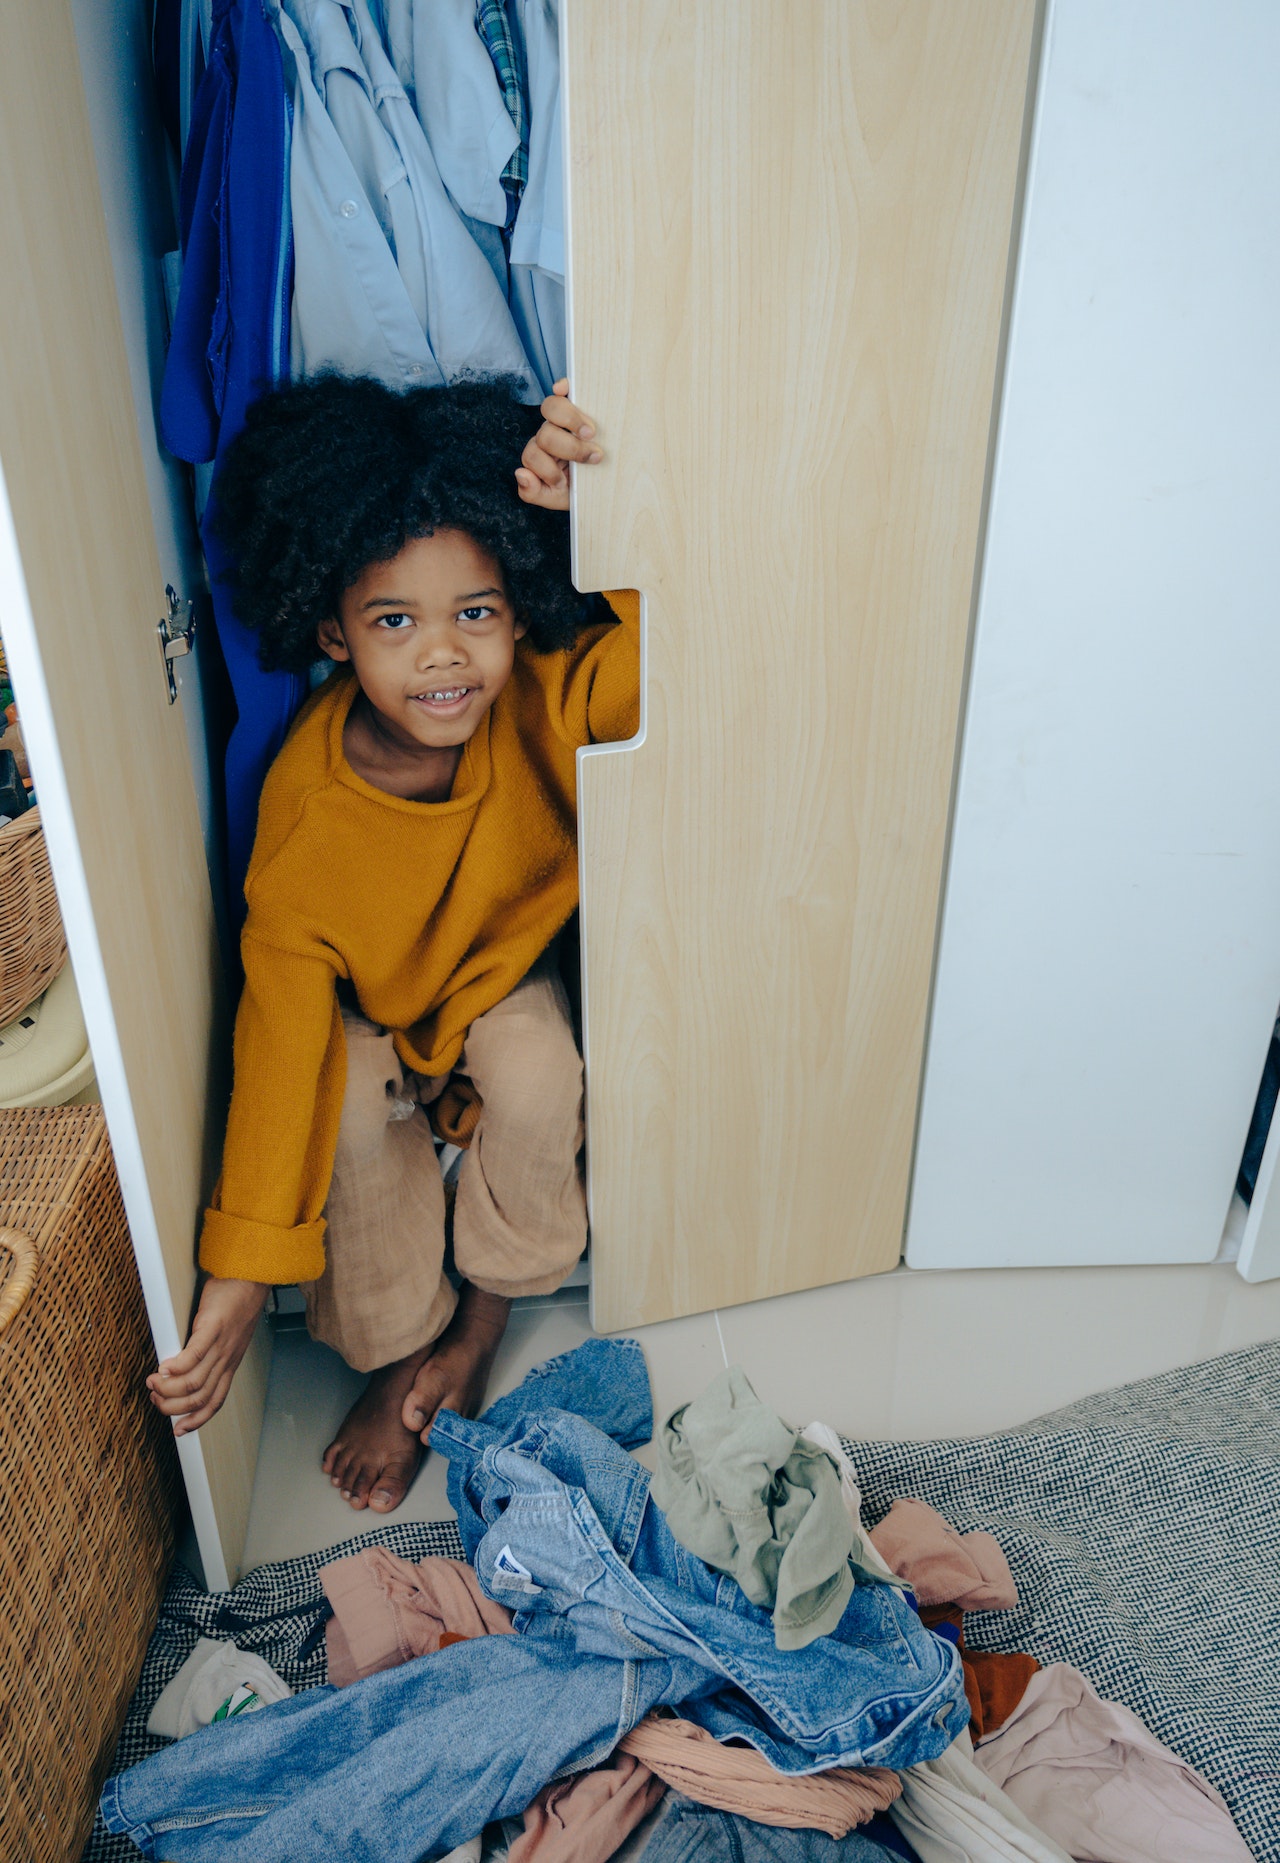 Child hiding in the closet? Here's what it means